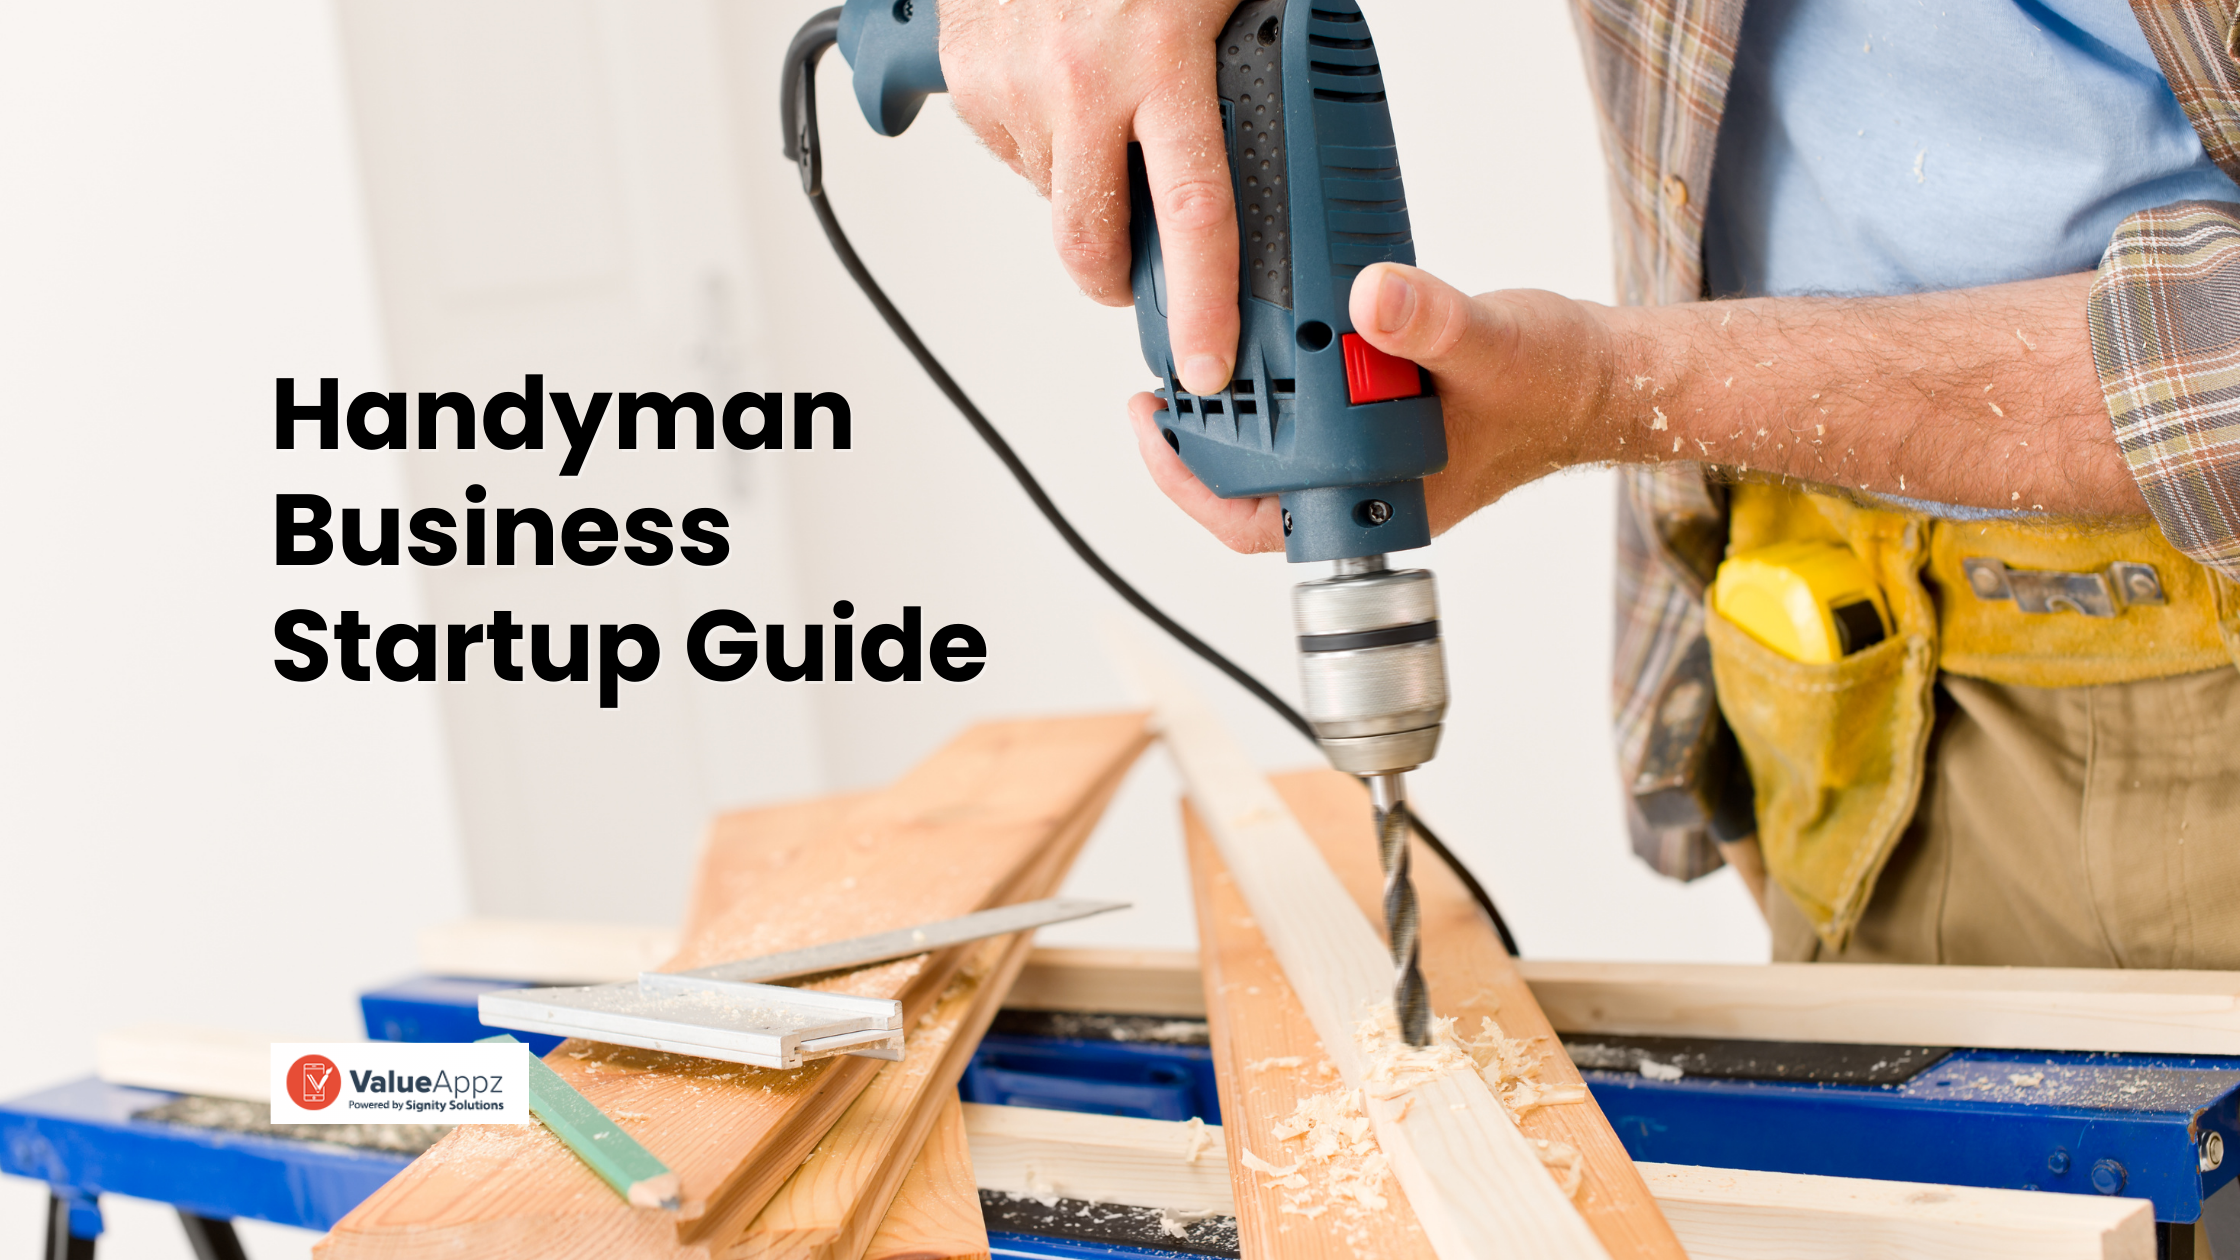 Complete Guide To Start A Successful Handyman Business - ValueAppz